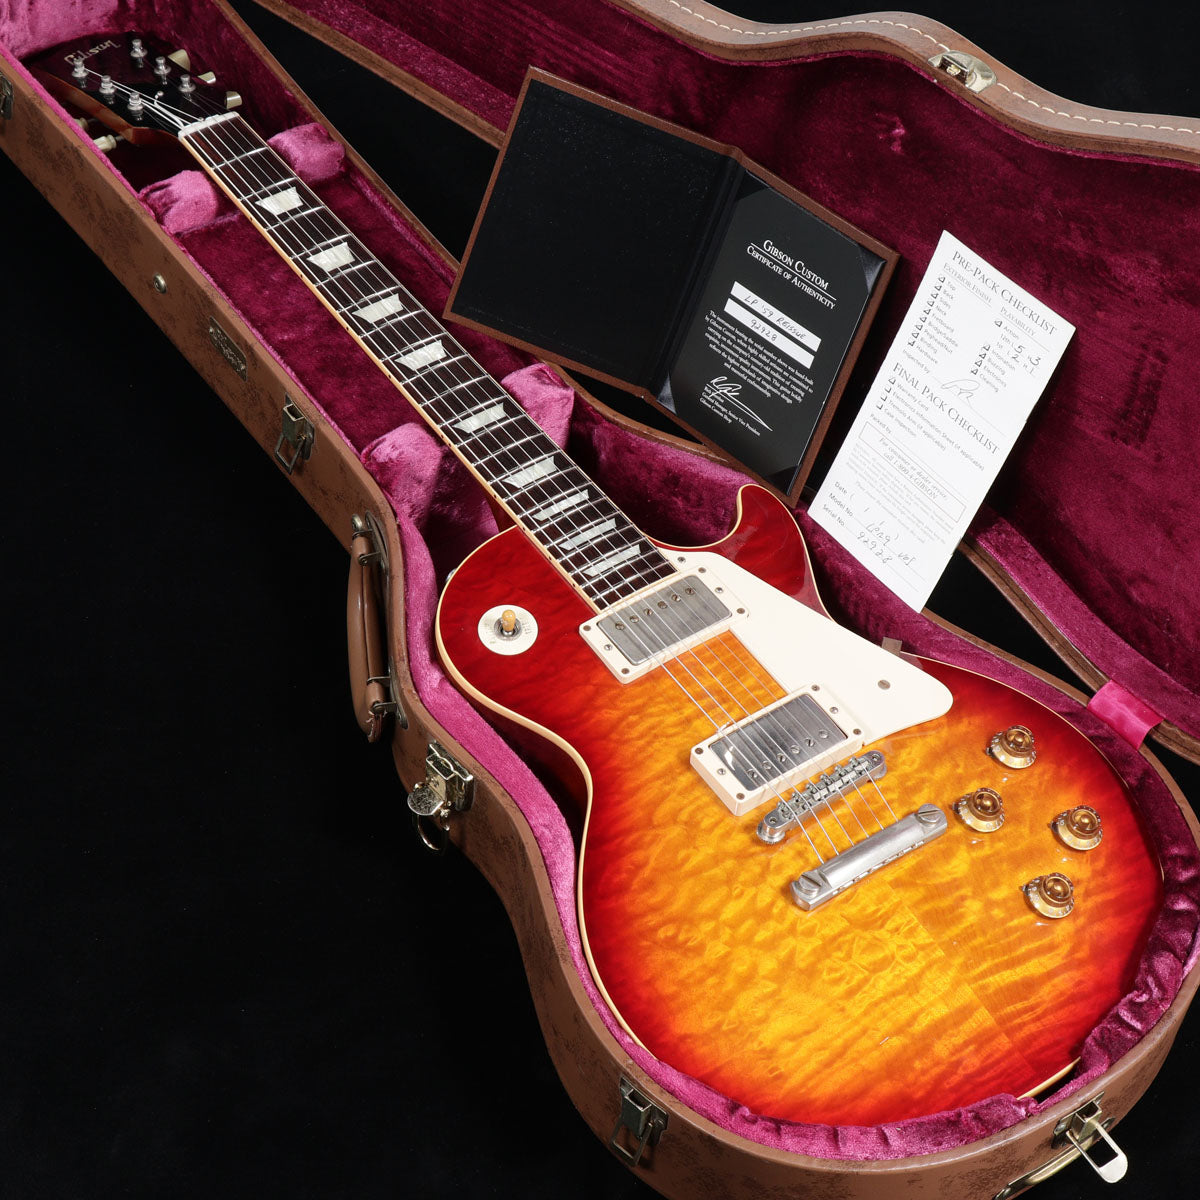 [SN 92928] USED GIBSON CUSTOM / Historic Collection 1959 Les Paul Standard VOS 2012 Washed Cherry / MOD [05]